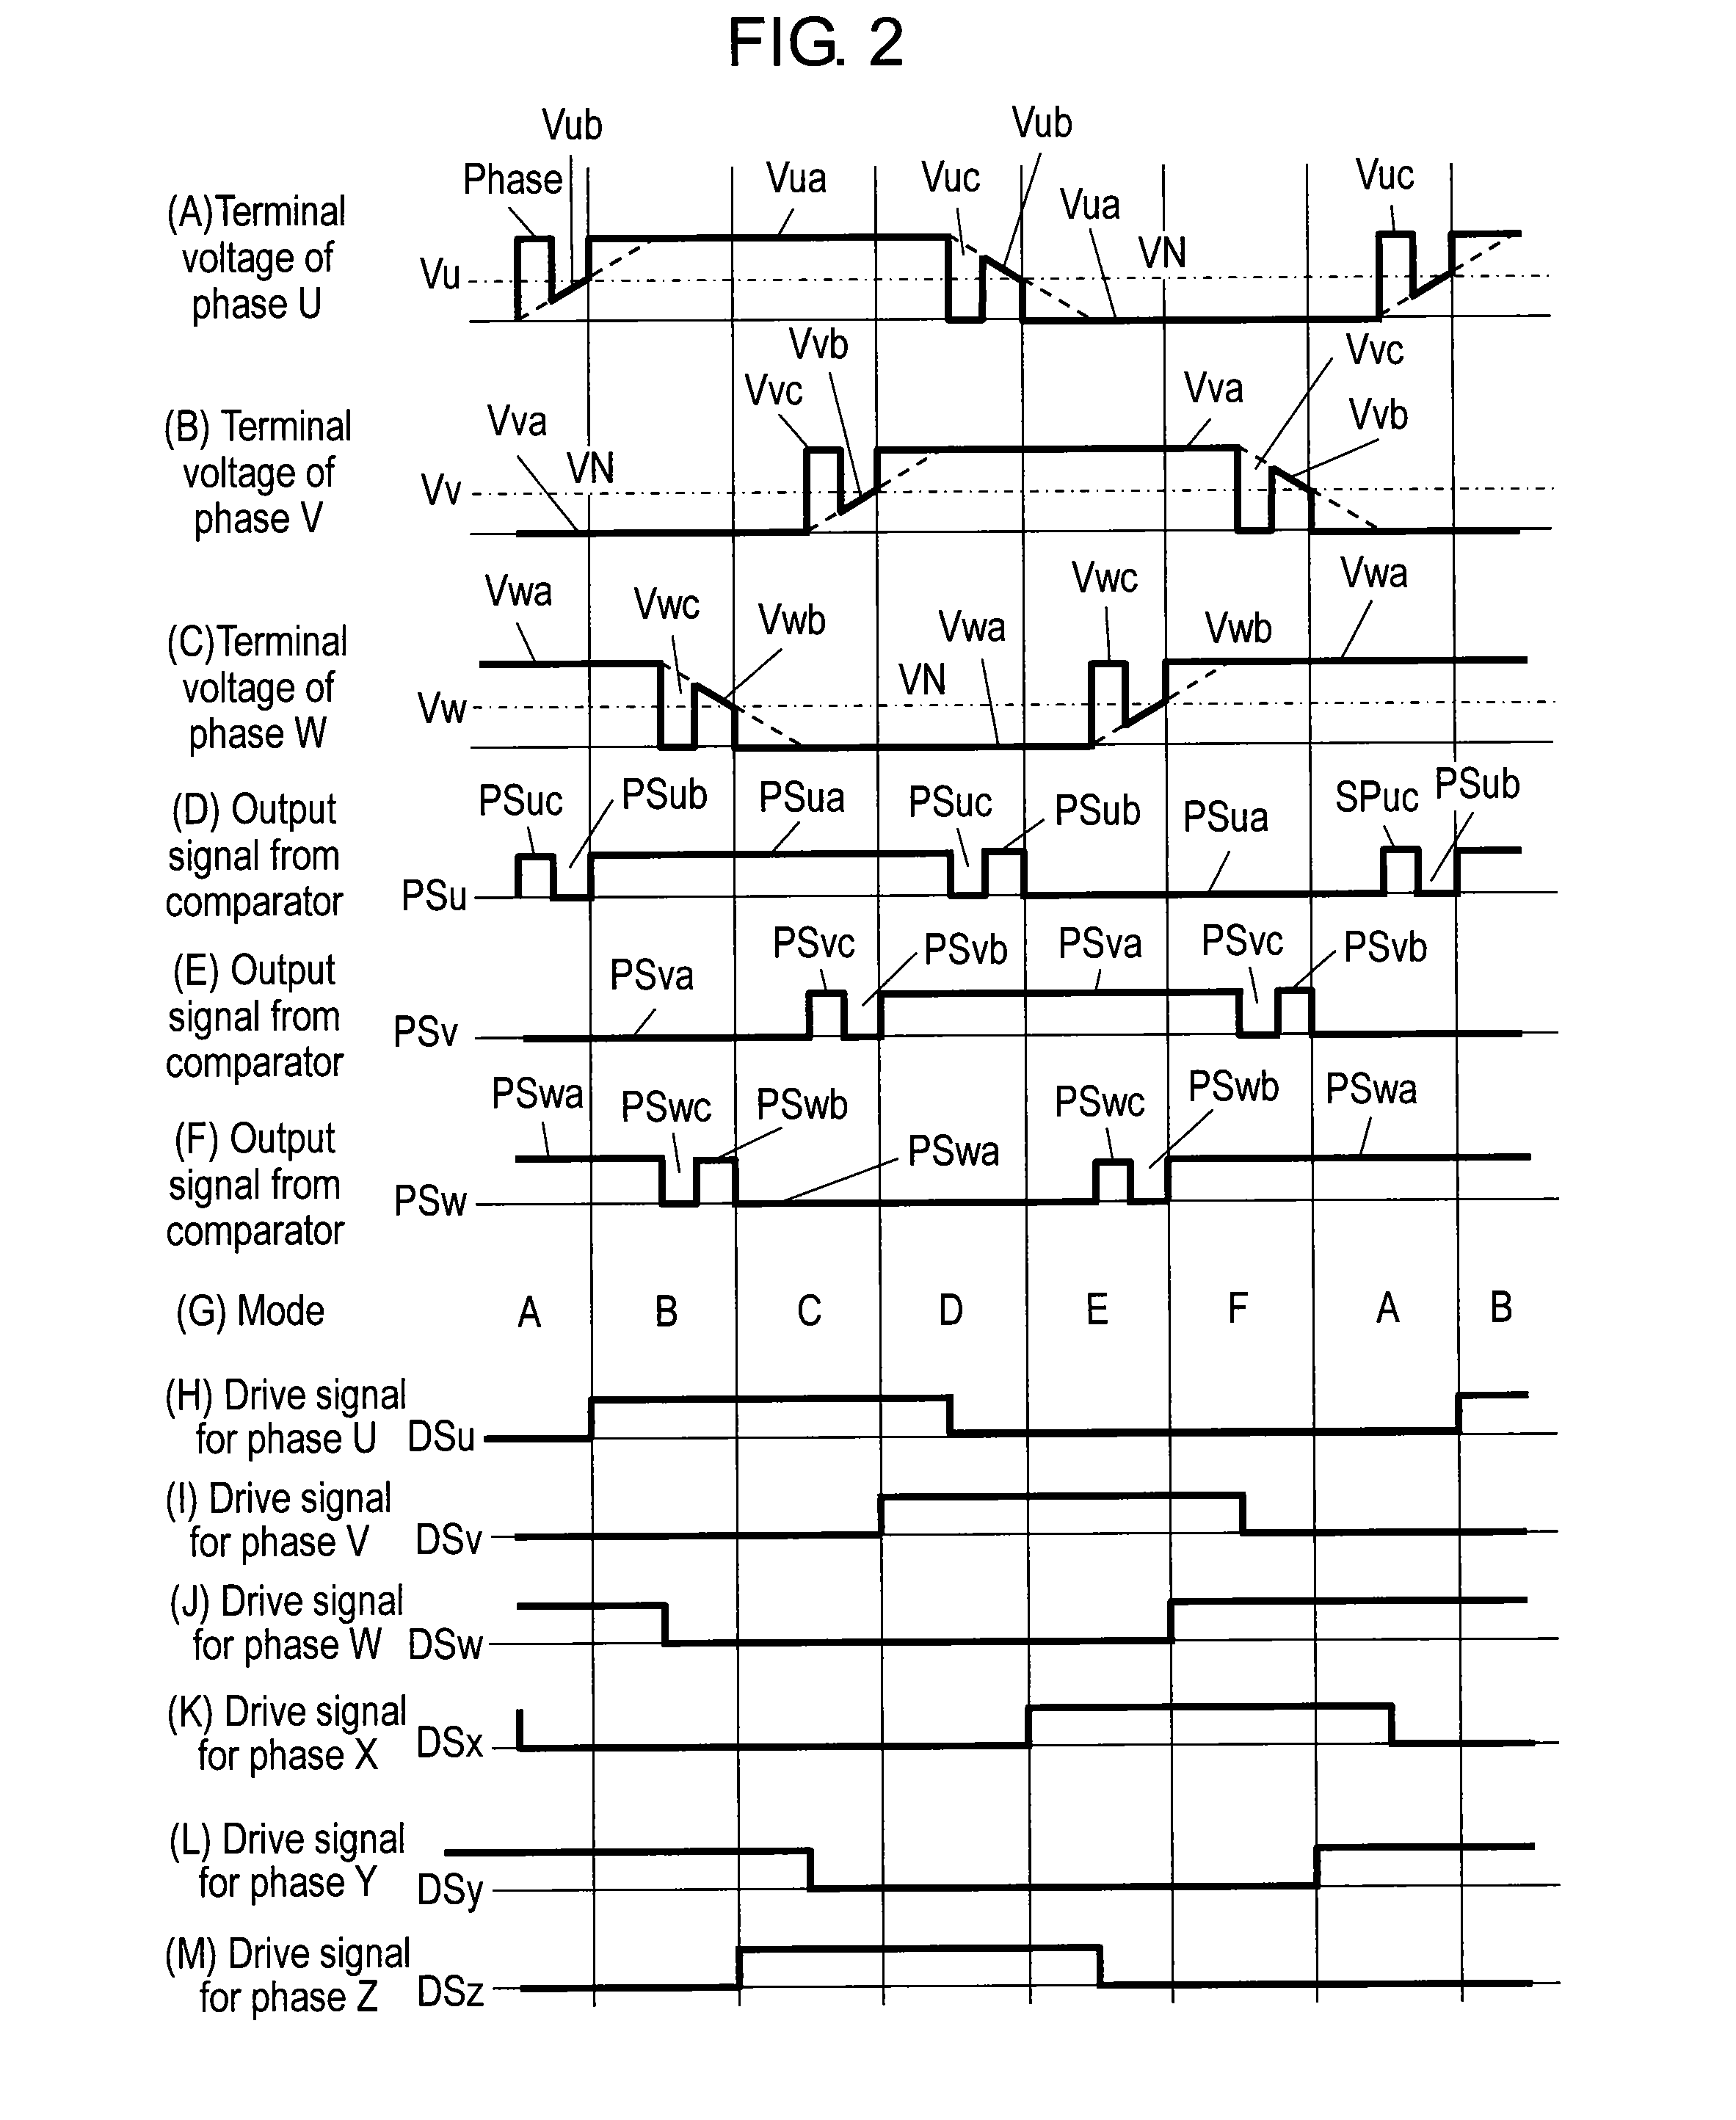 Inverter controller, compressor, and electric home appliance